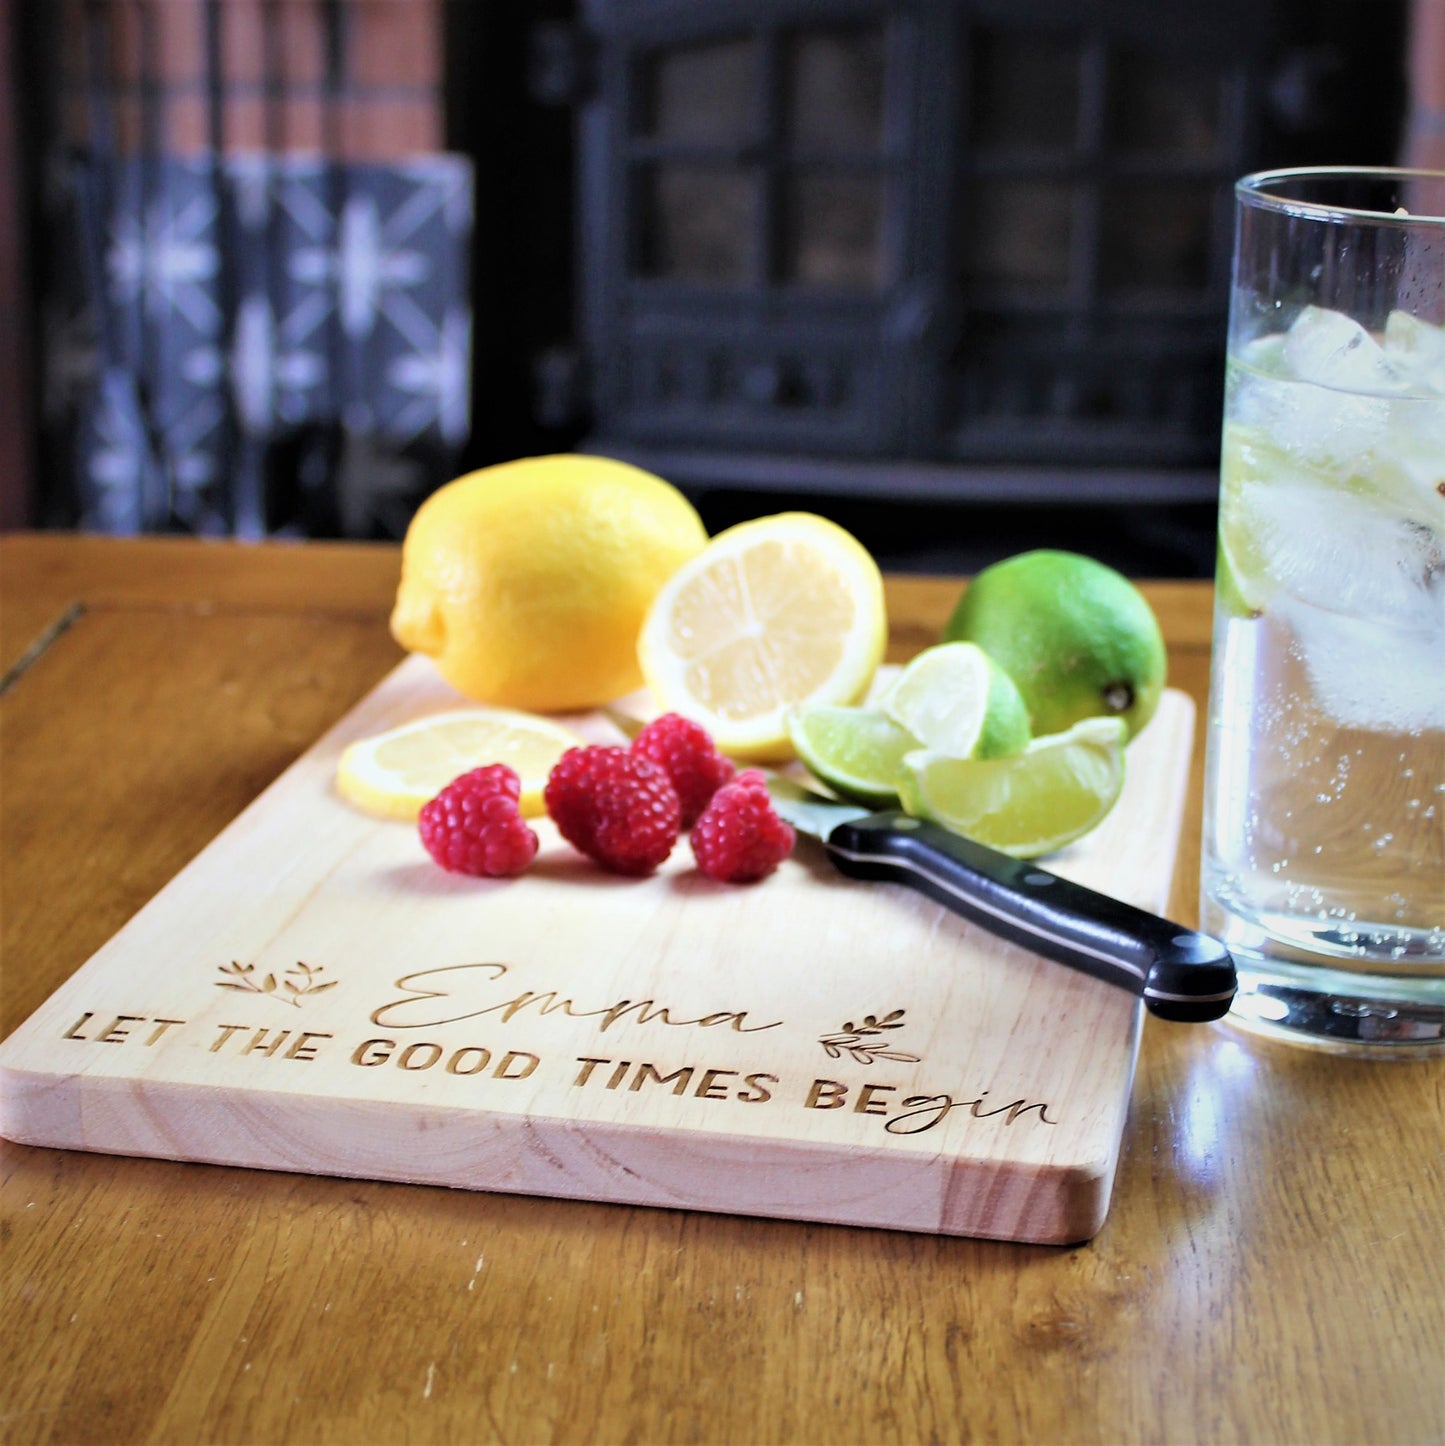 Fruit cutting chopping board for gin, made from wood and engraved with a name and a gin quote